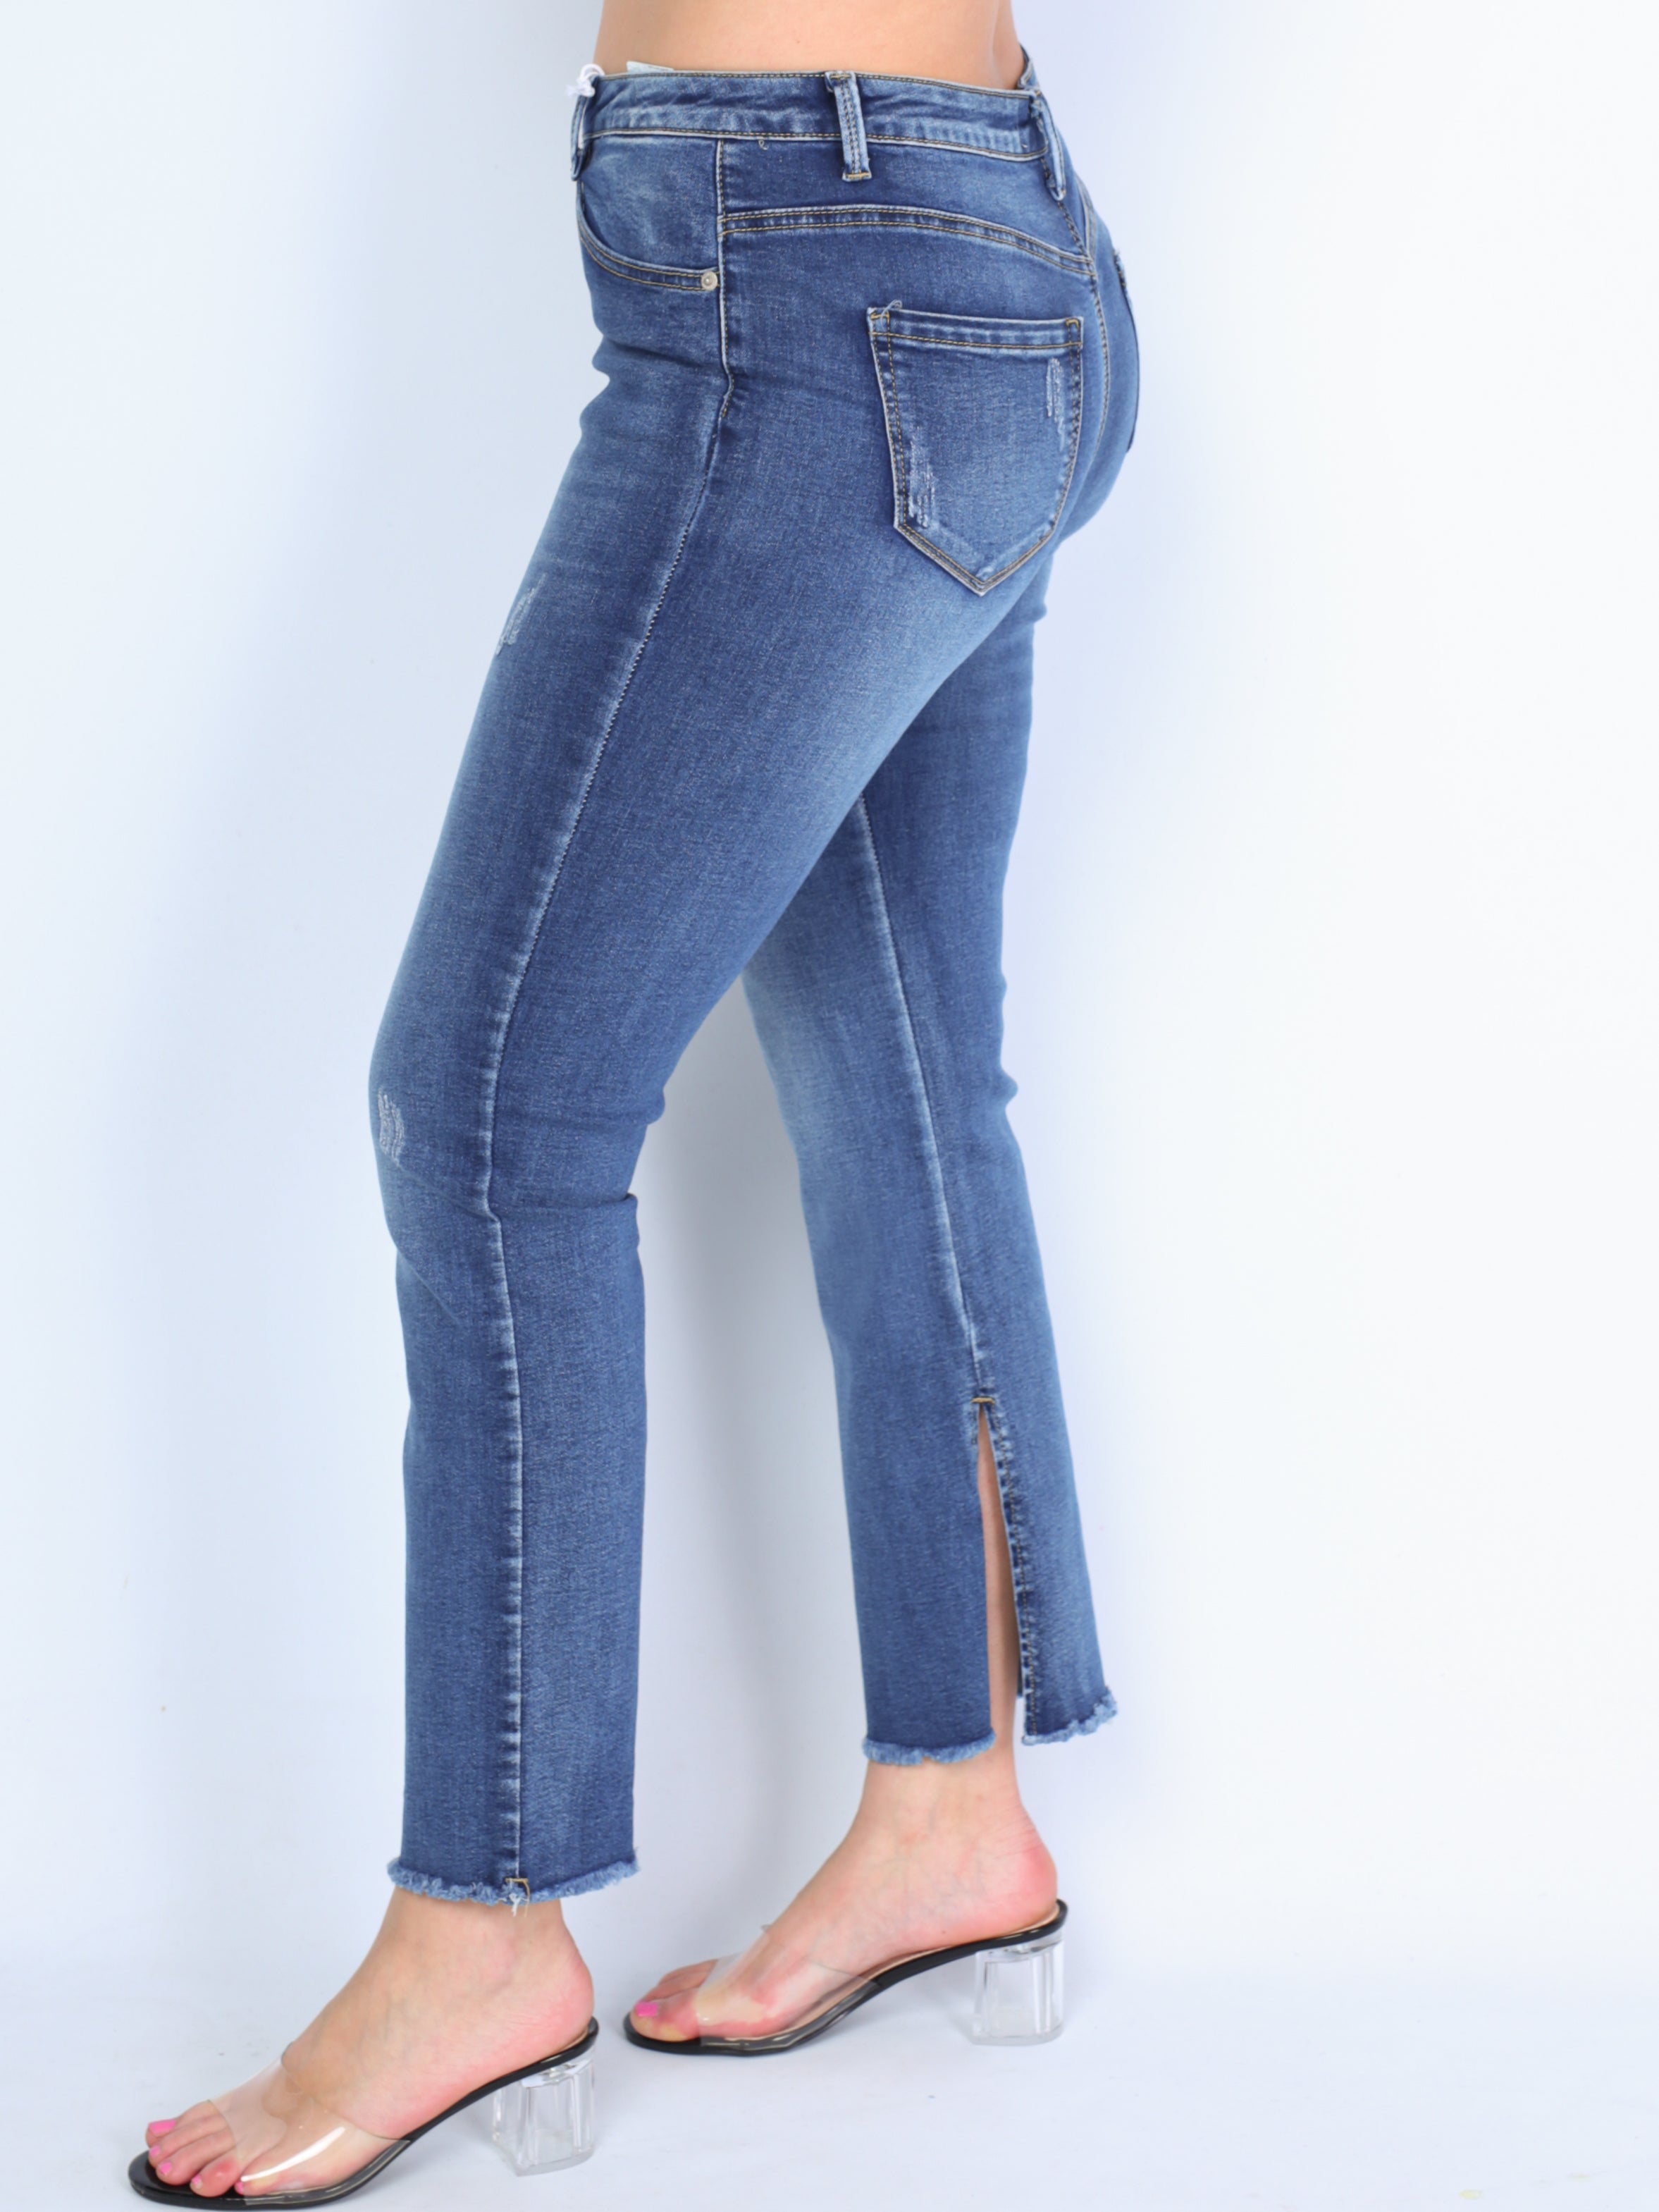 Jeans with ripstops